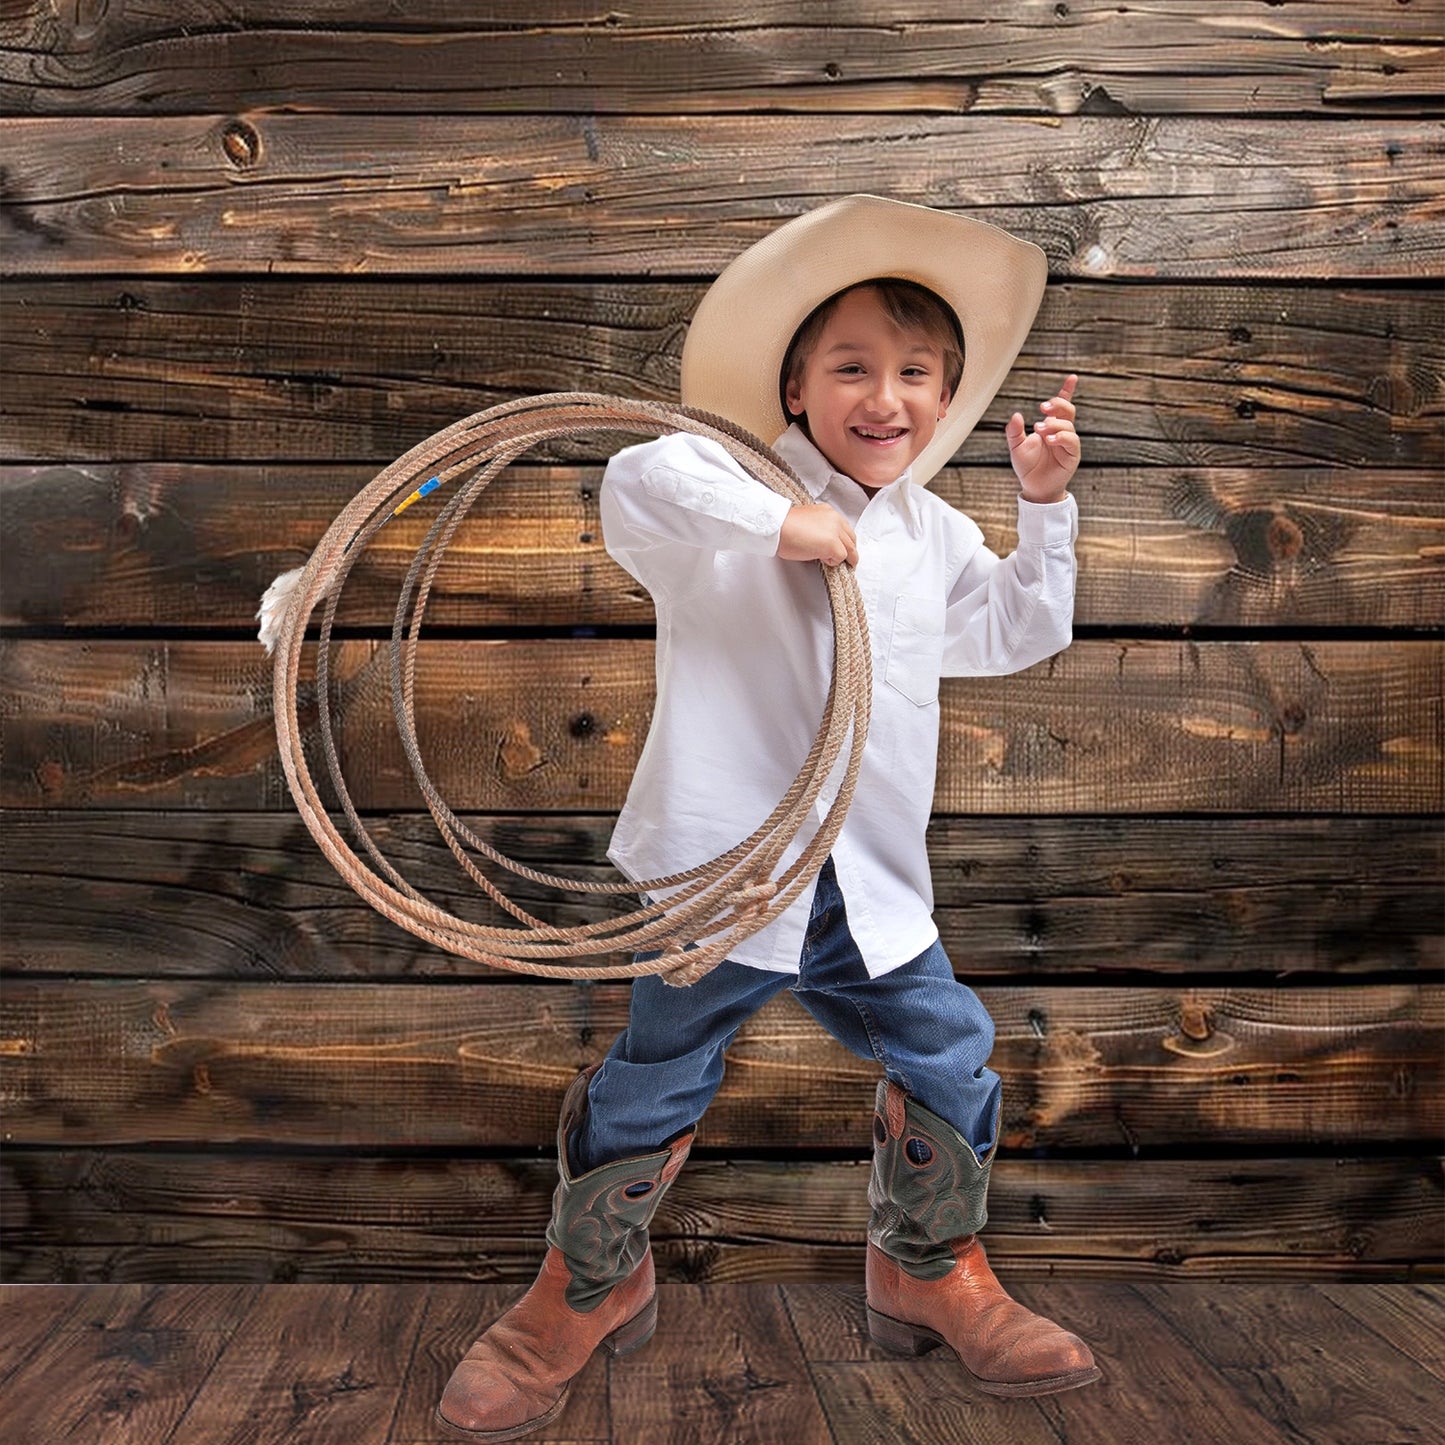 A young child wearing a cowboy hat, white shirt, blue jeans, and cowboy boots holds a lasso, standing against an ideasbackdrop Brown Wood Backdrop Photographers for Birthday Baby Shower Background Photo Booth Video Shoot Studio Prop.